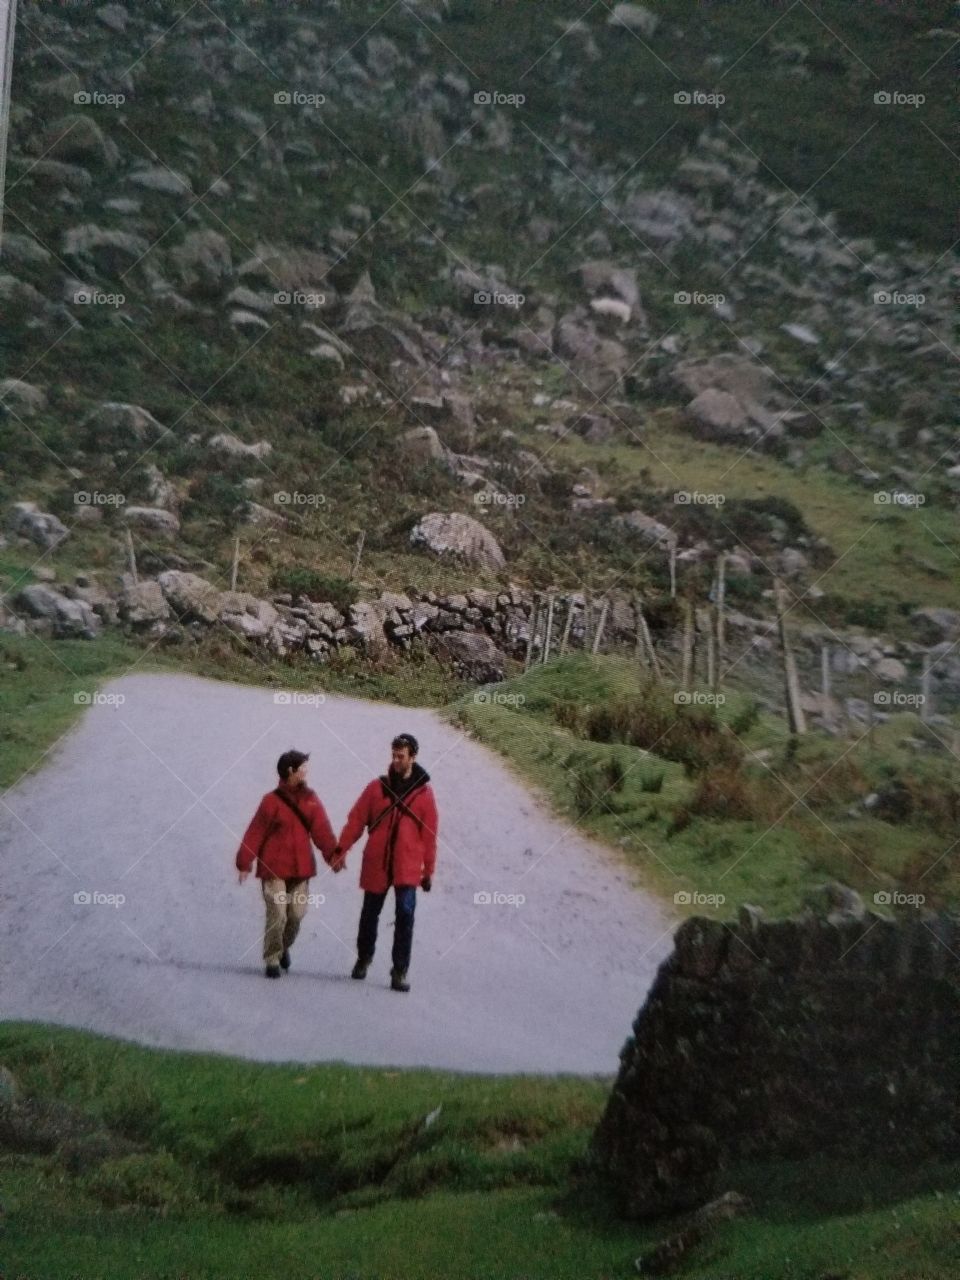 Although they are small, this hiking couple dominates the scene because of their bright red jackets and because they are located in the brightest area of the frame, to which the eye is naturally drawn.